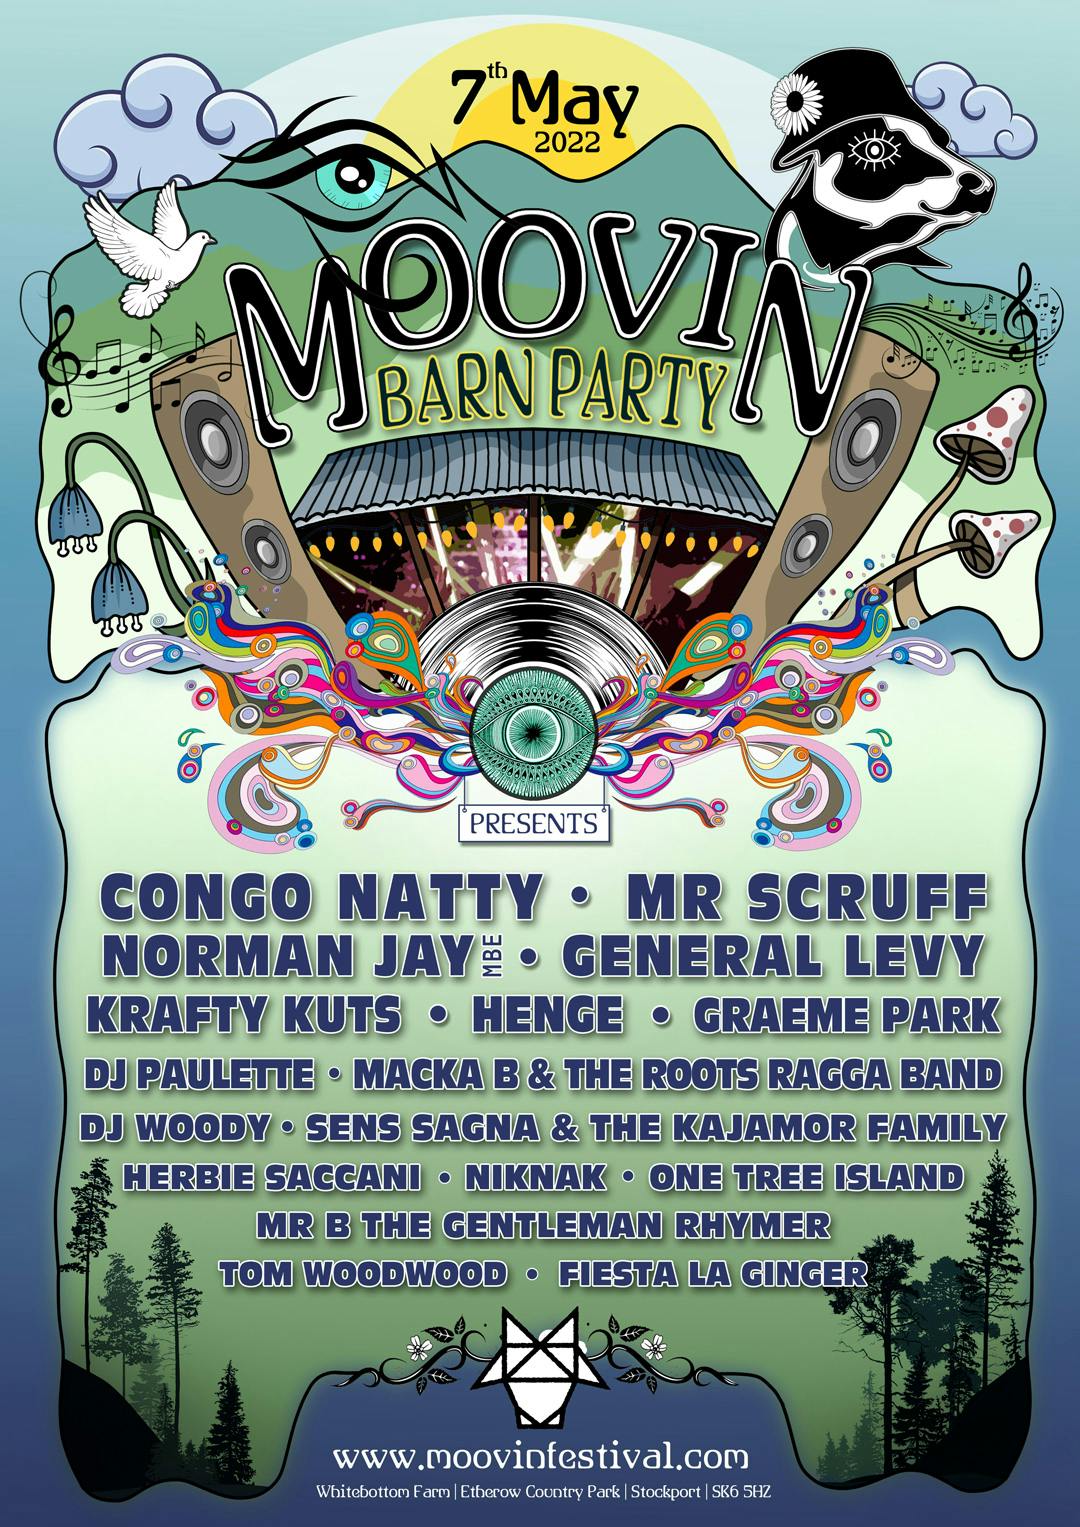 Final tickets release for Moovin Barn Party